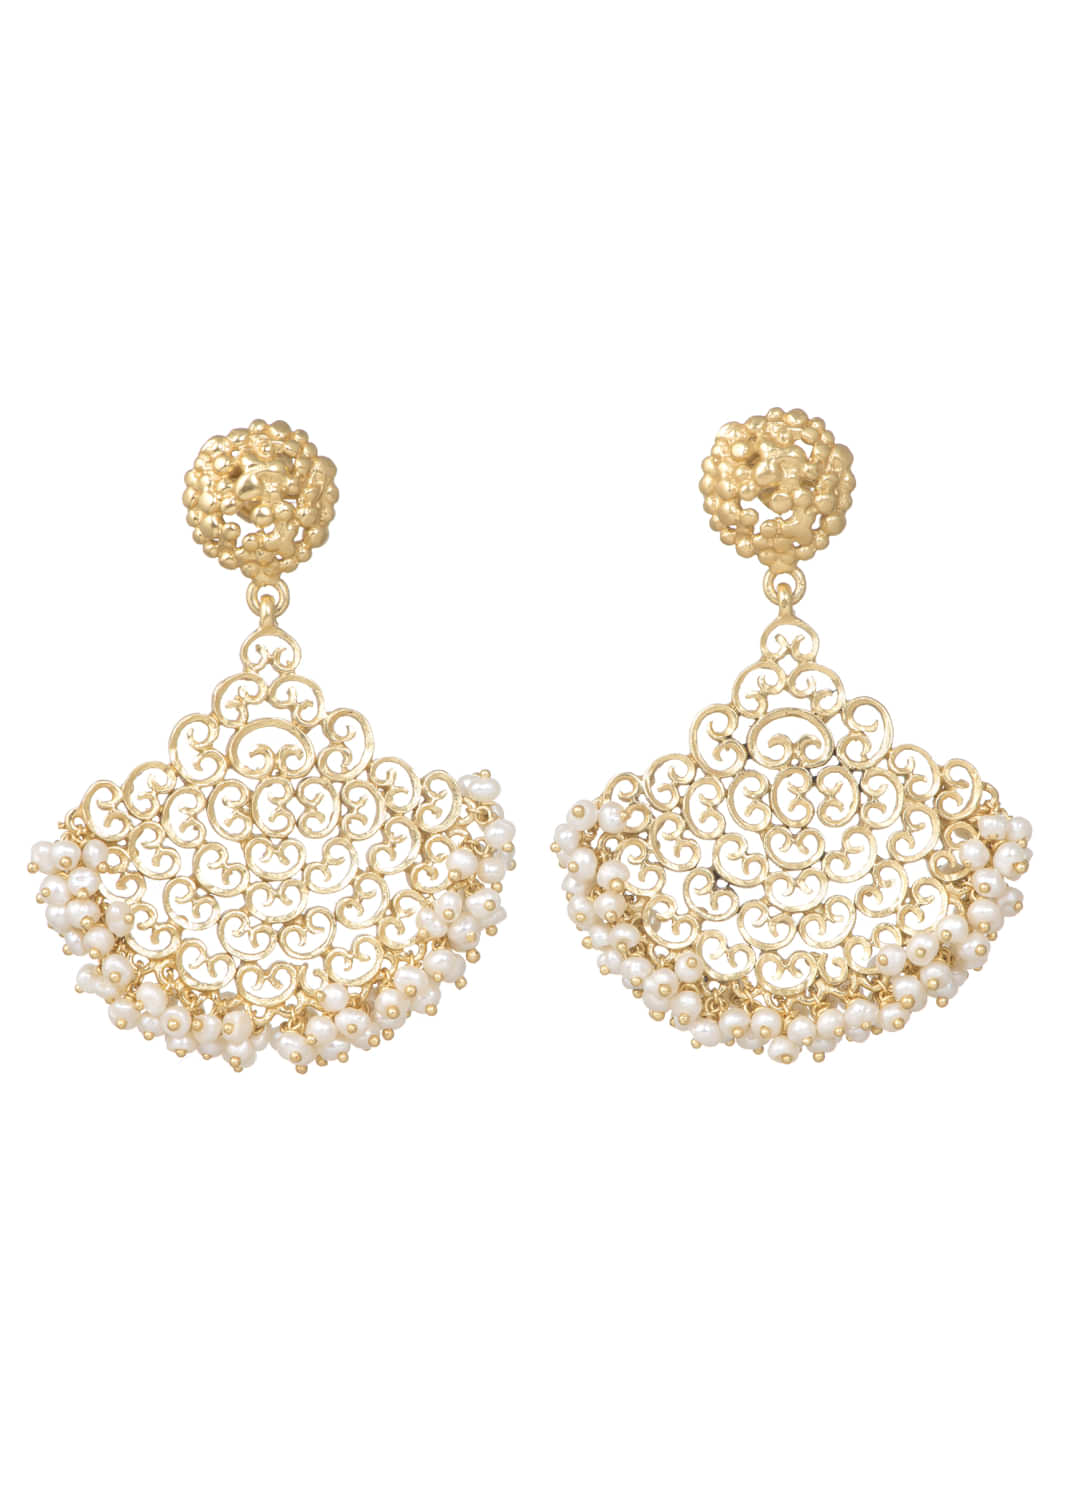 Gold Plated Chandelier Earrings With Filigree Design And Pearls By Zariin